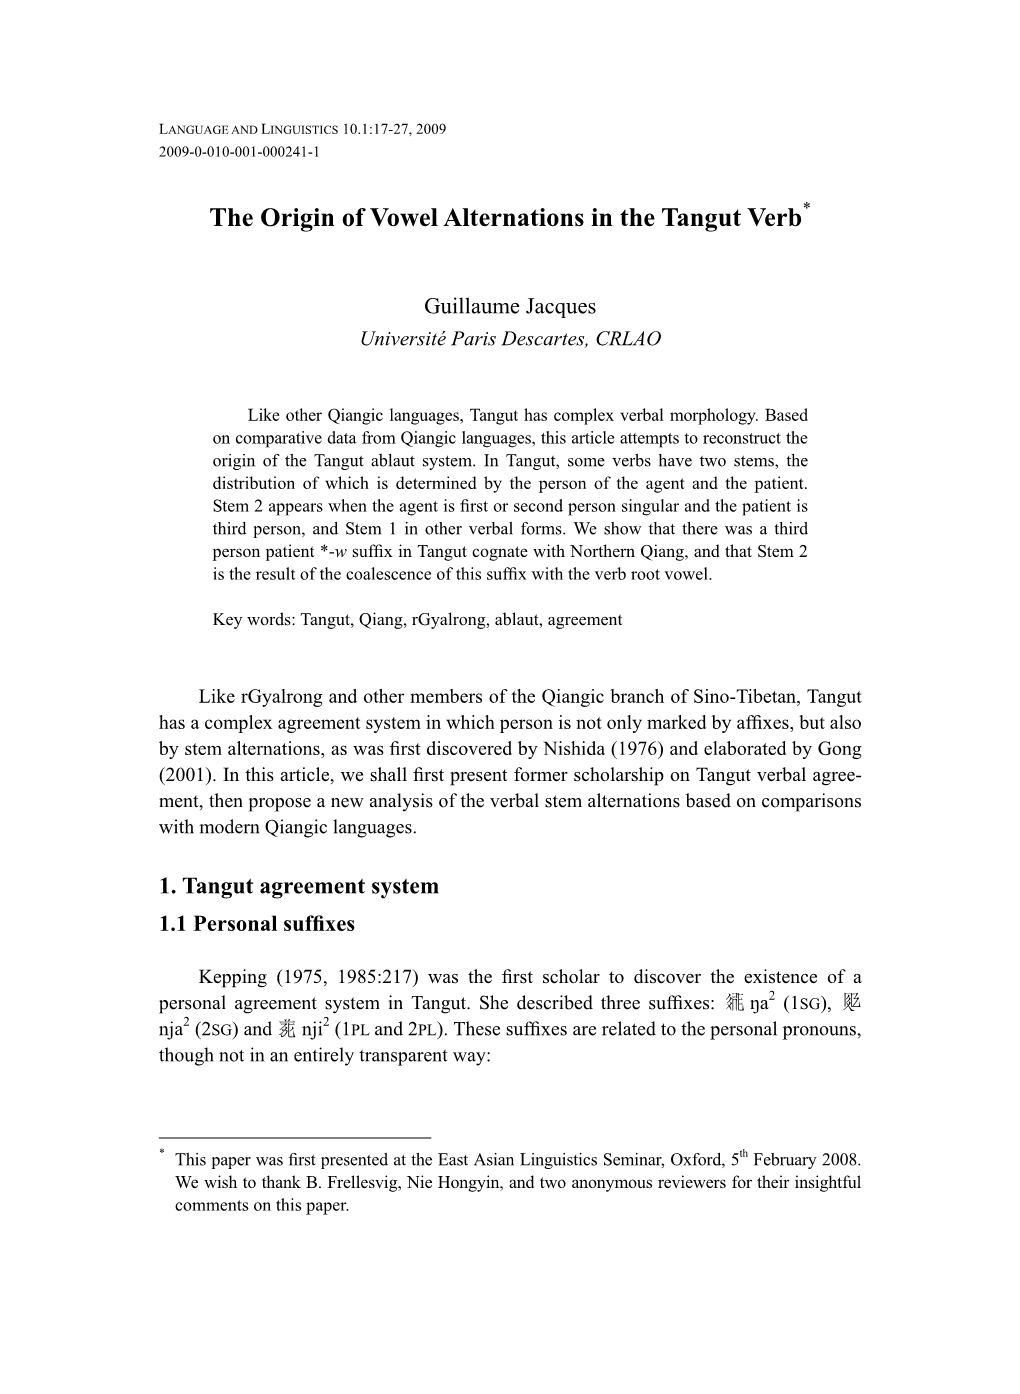 The Origin of Vowel Alternations in the Tangut Verb*